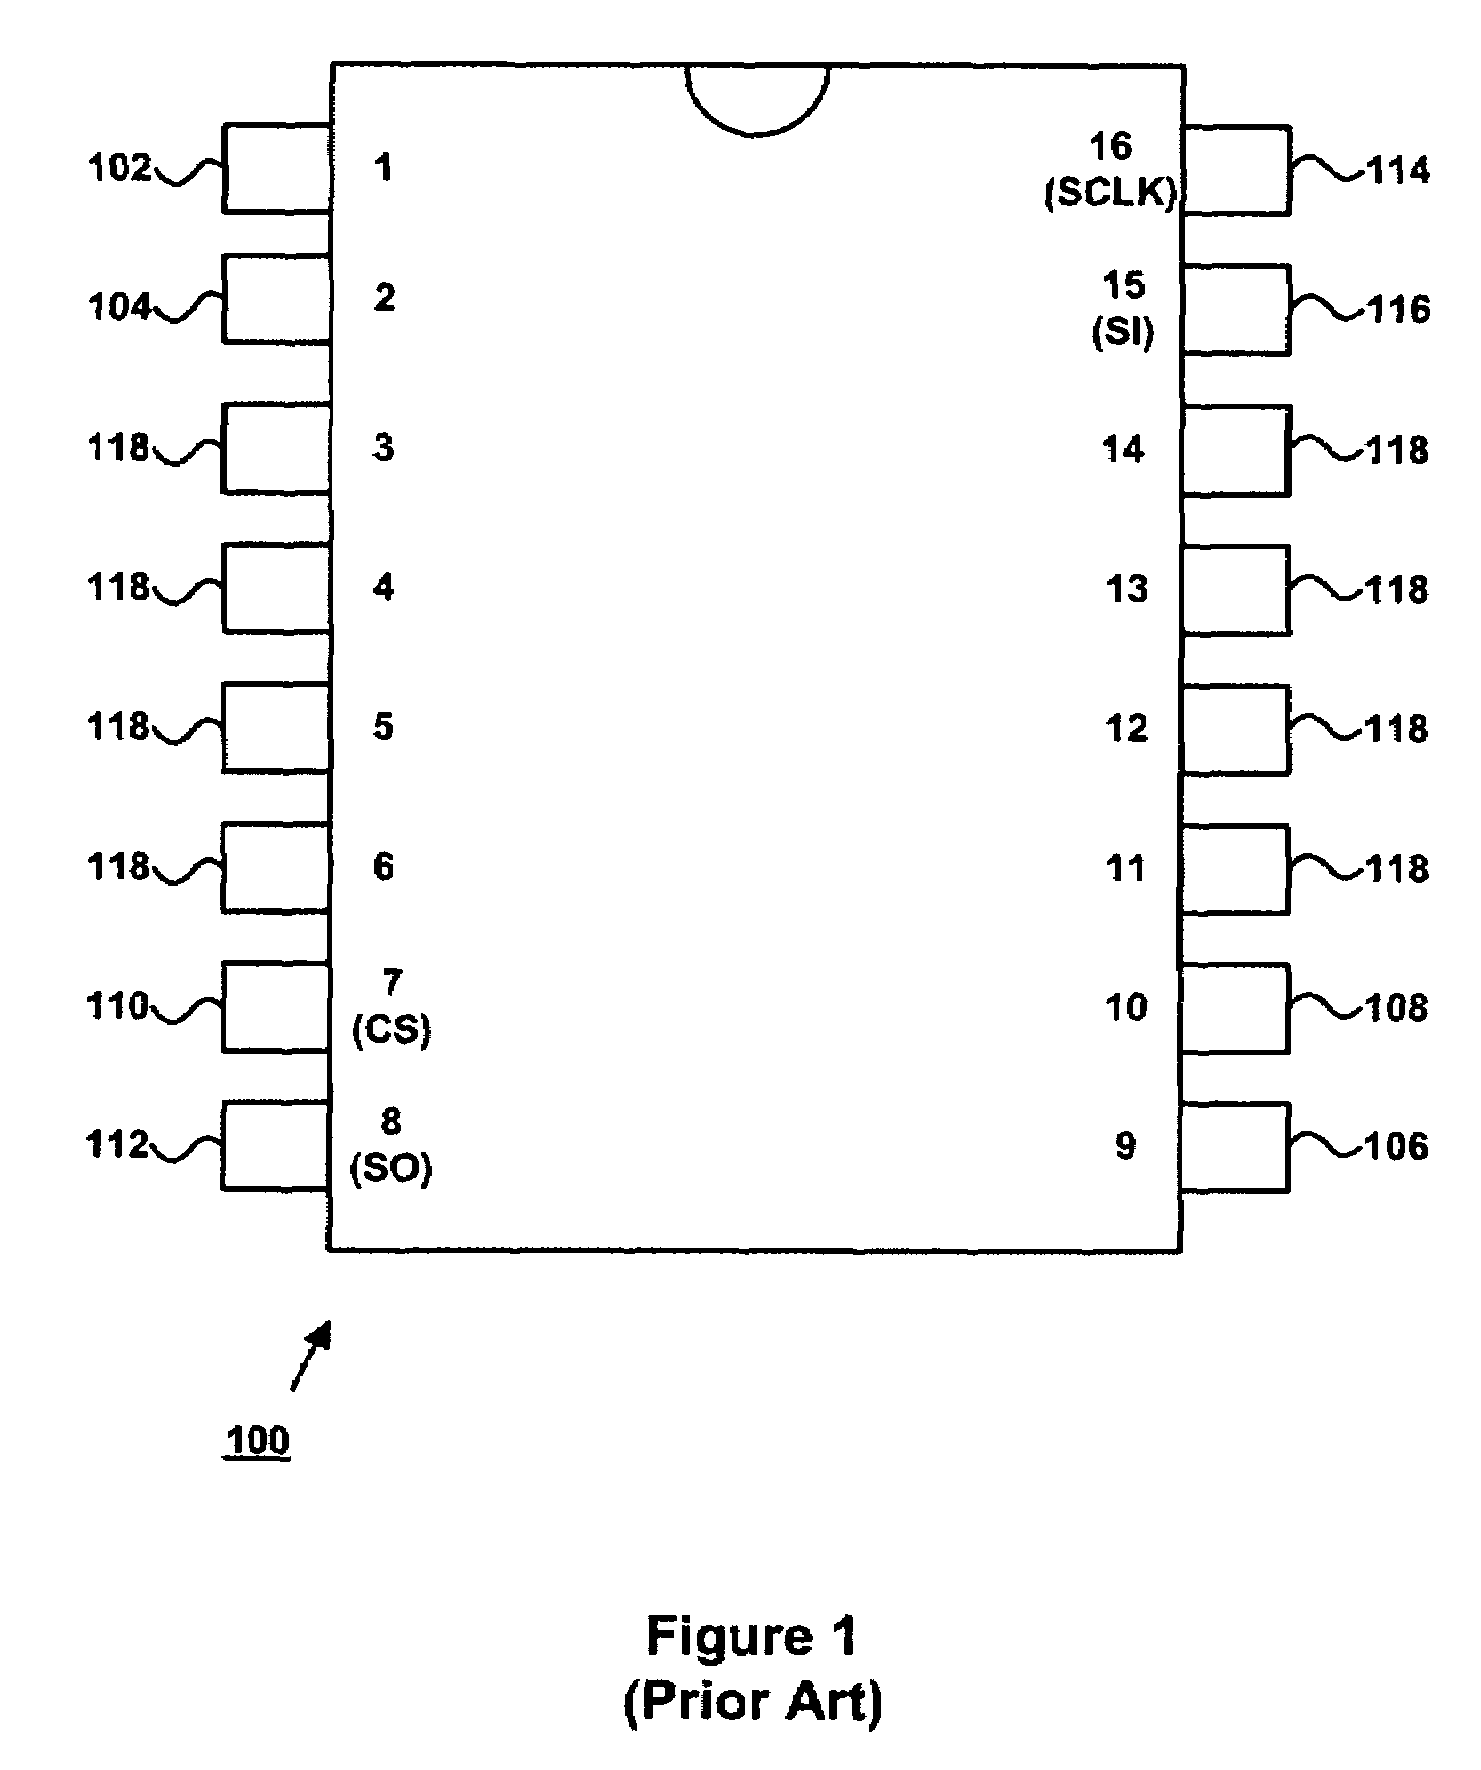 Serial peripheral interface memory device with an accelerated parallel mode